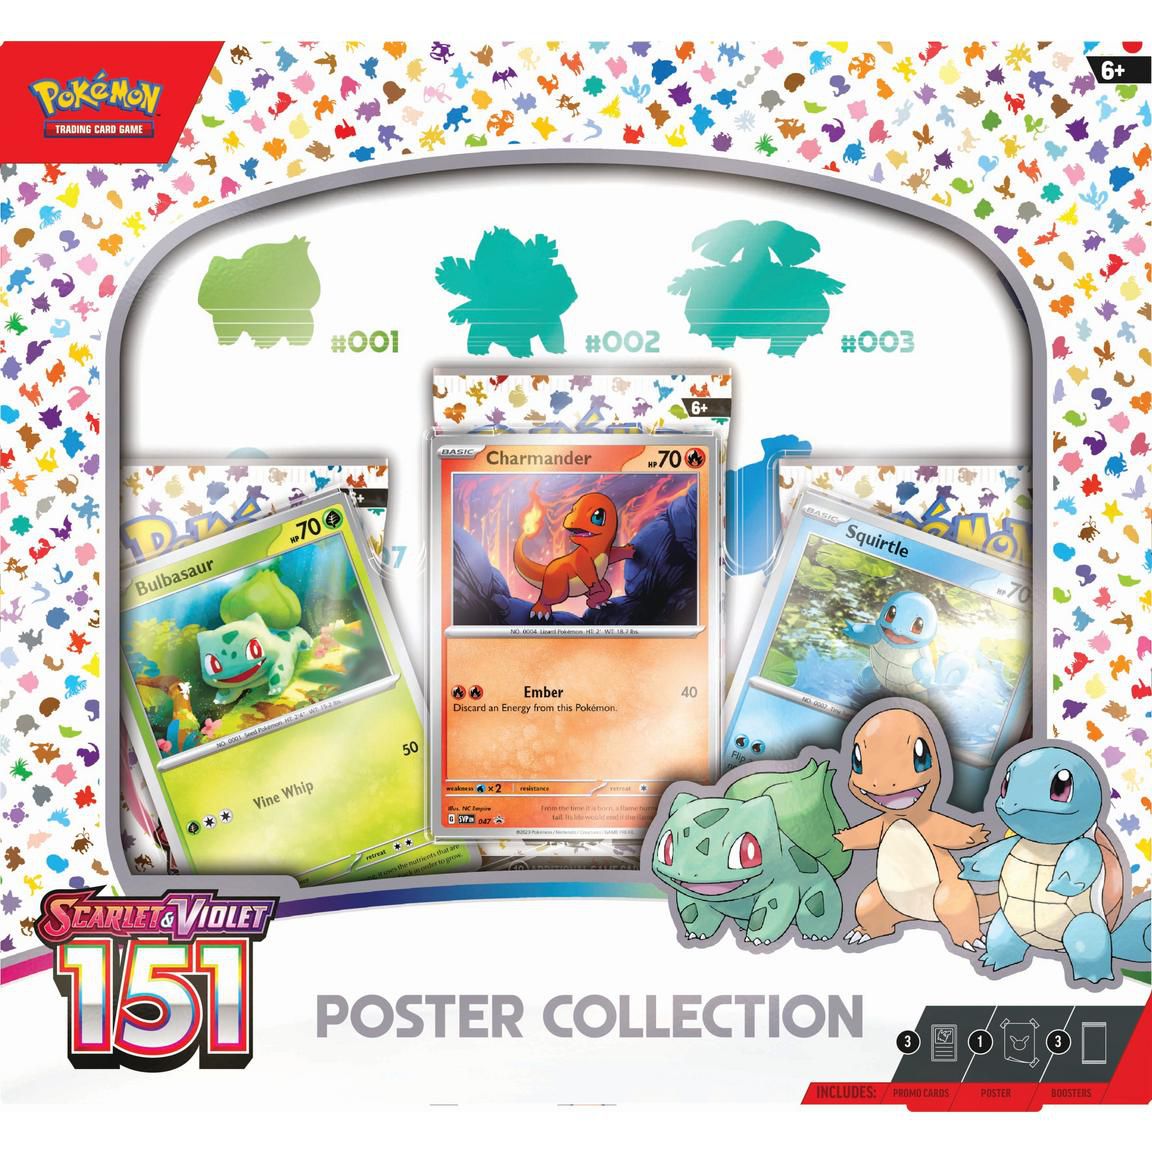 A box of the poster collection of Pokémon Scarlet and Violet: 151 Collection TCG, including three cards of Bulbasaur, Charmander, and Squirtle.